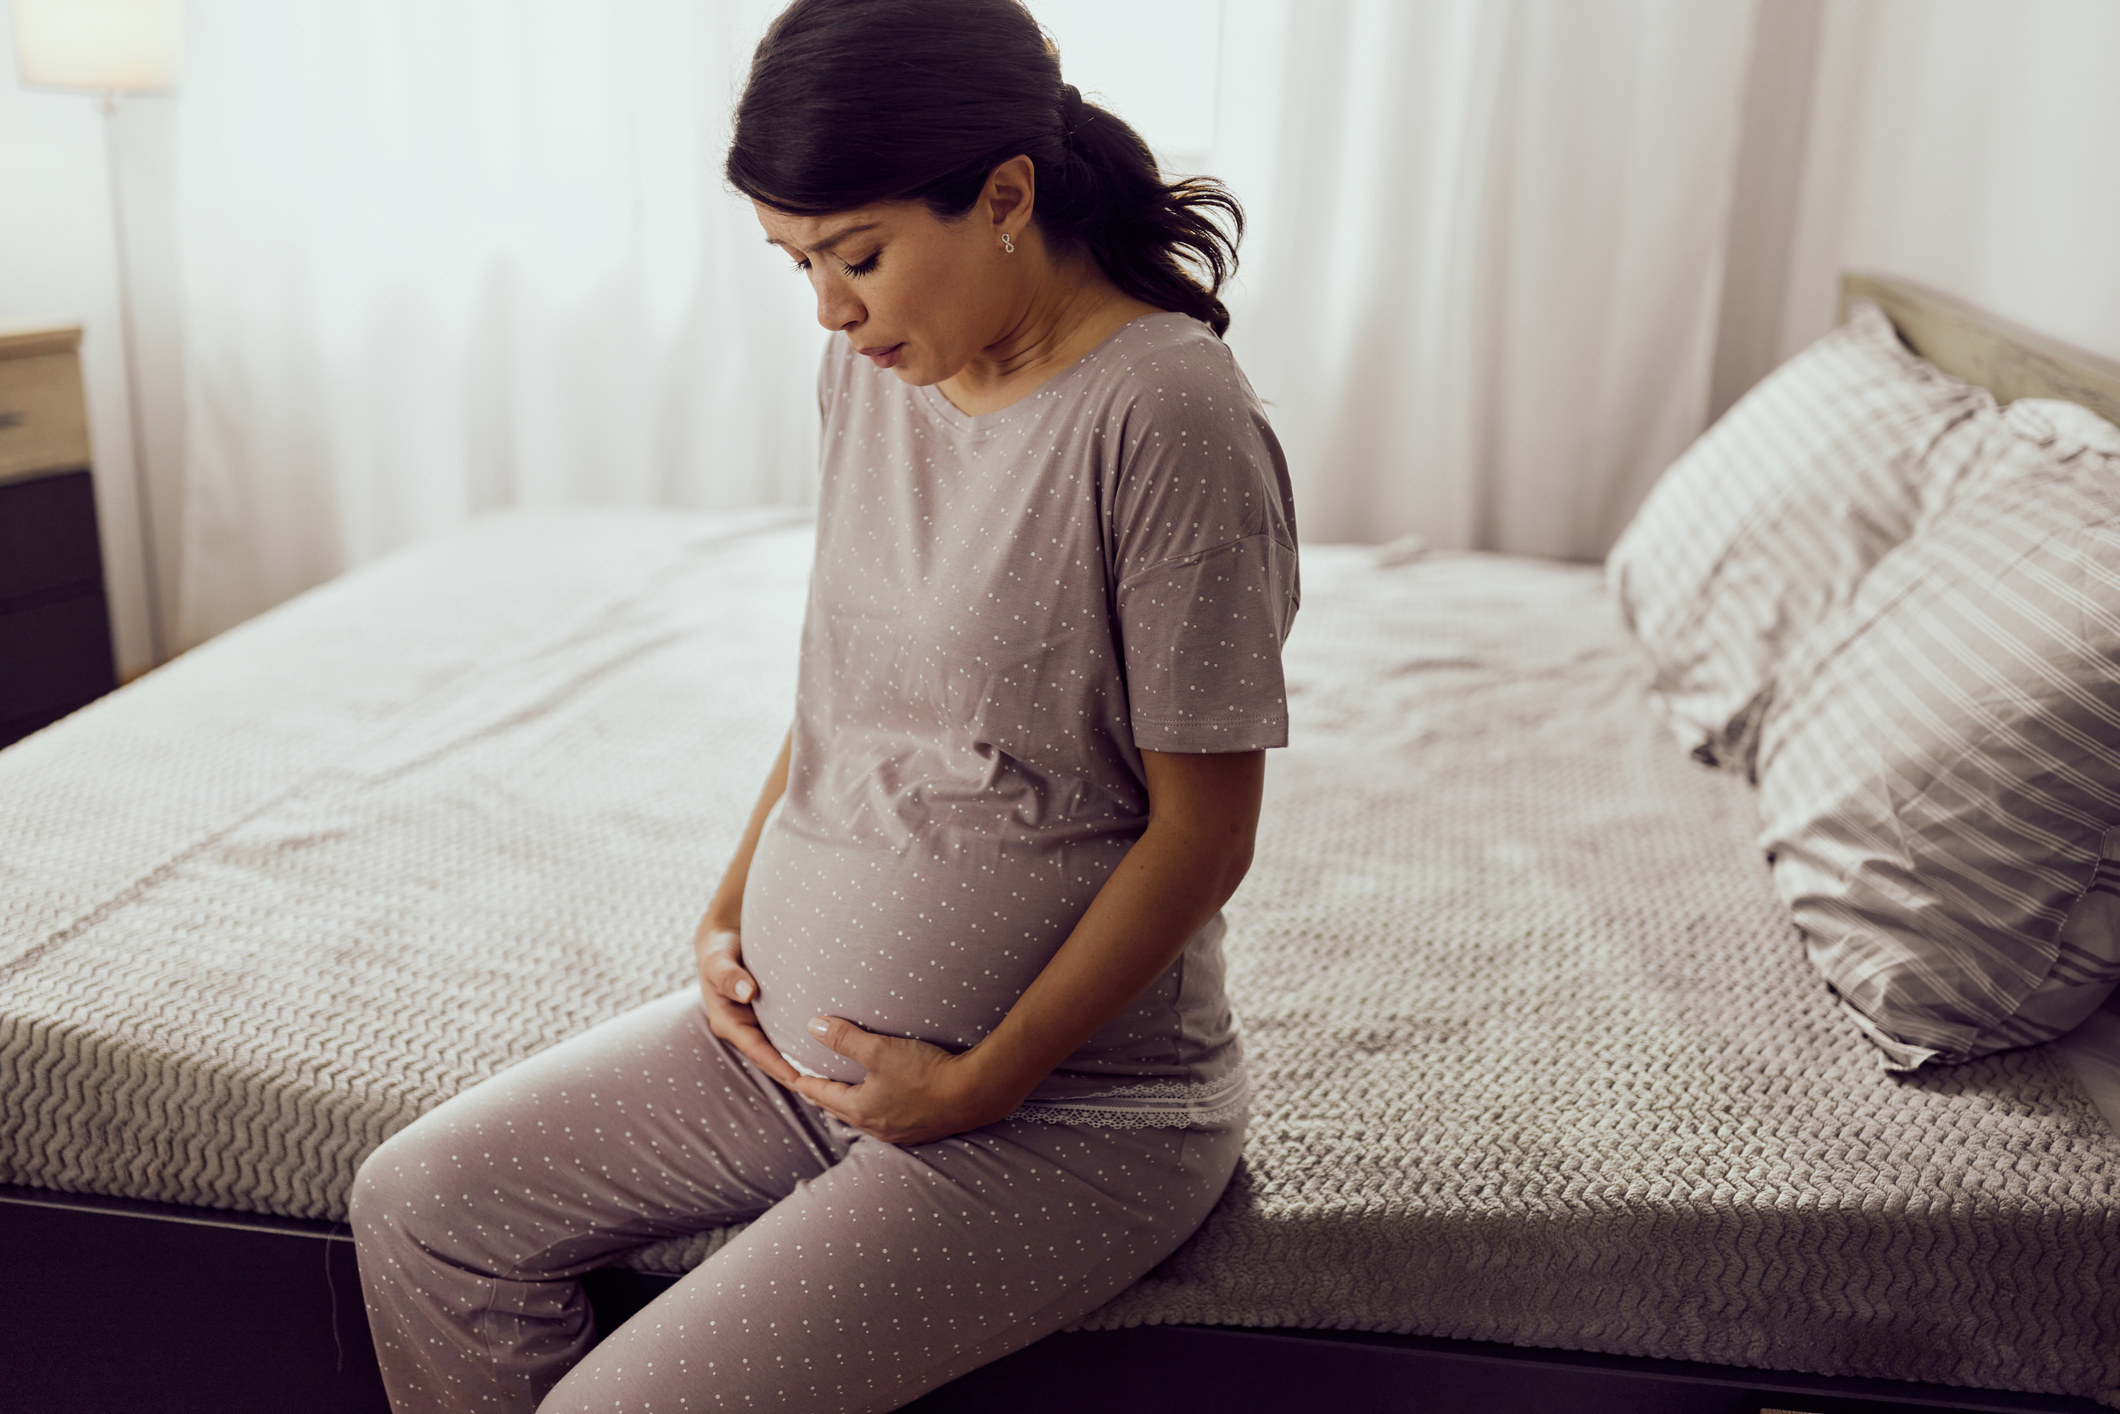 A pregnant woman sitting on her bed